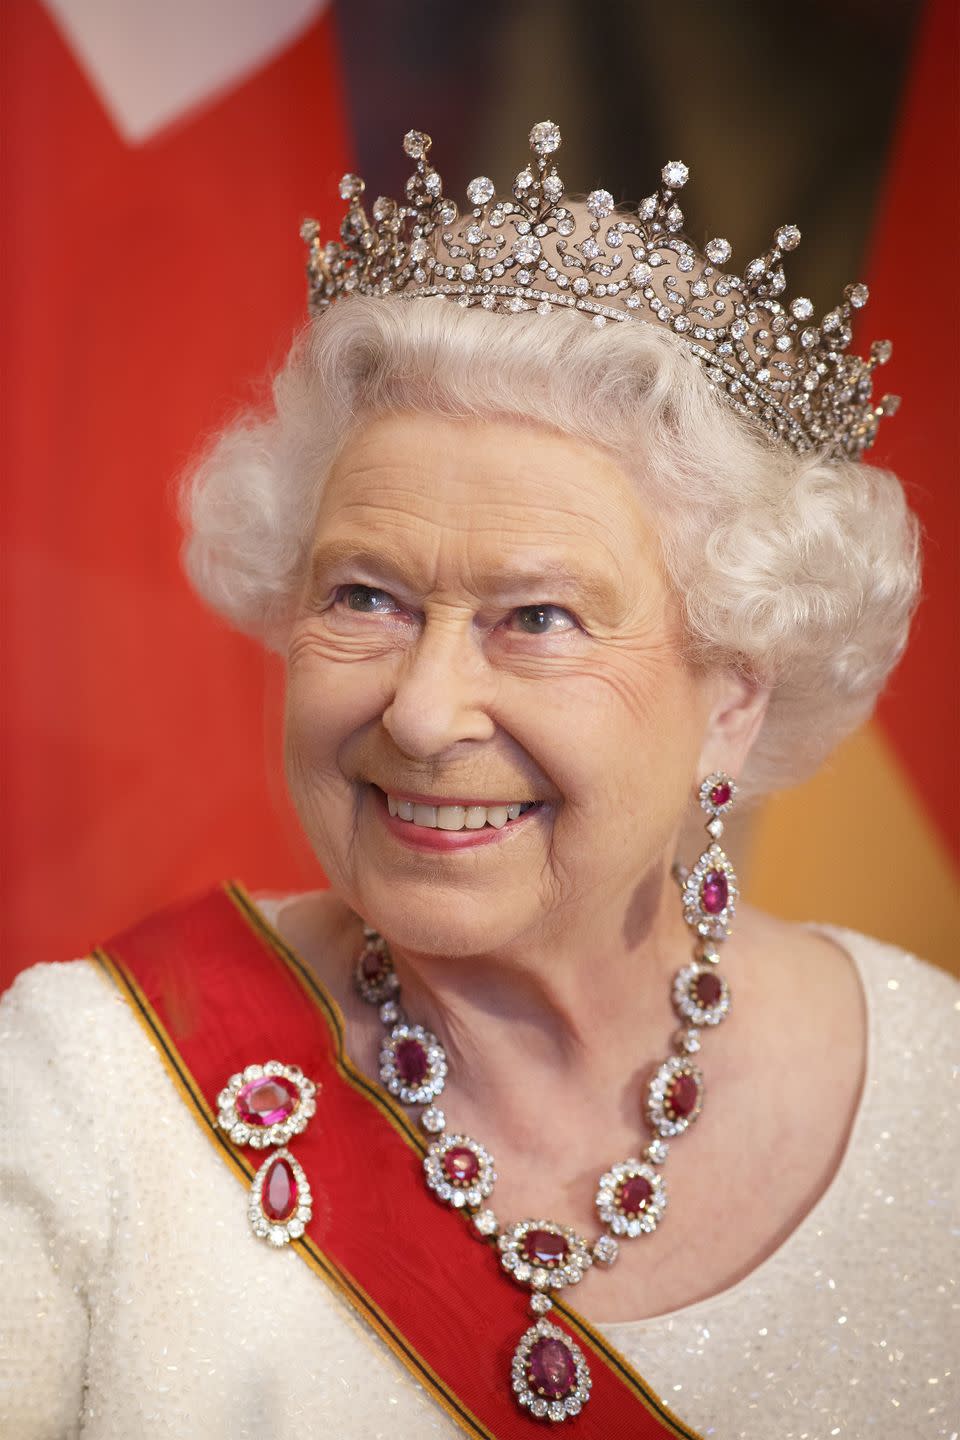 <p> On September 9, 2015, Queen Elizabeth II became the <a href="https://www.countryliving.com/uk/news/a39102607/longest-reigning-monarchs/" rel="nofollow noopener" target="_blank" data-ylk="slk:longest-reigning British monarch" class="link ">longest-reigning British monarch</a> and female head of state. Here, the Queen attends a banquet during a visit to Berlin. She's also the most-traveled head of state, with 261 overseas visits and 96 state visits to 116 countries (as of her Diamond Jubilee in 2012). </p>